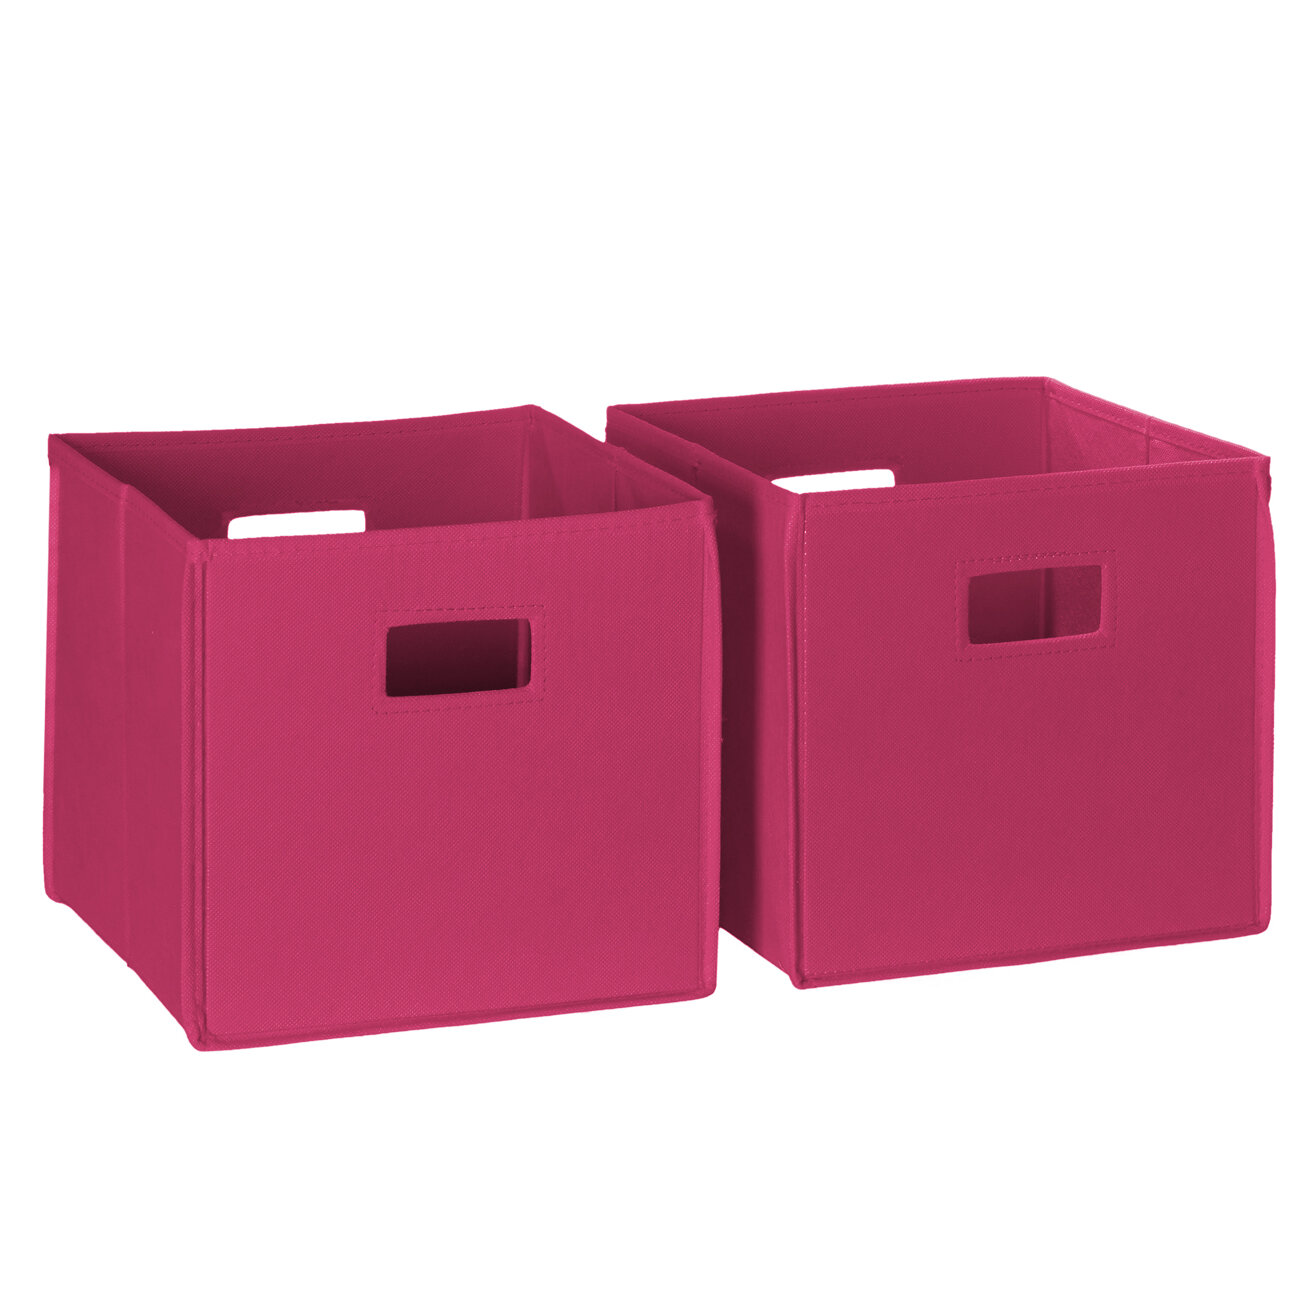 12 x 12 Storage Containers You'll Love in 2023 - Wayfair Canada